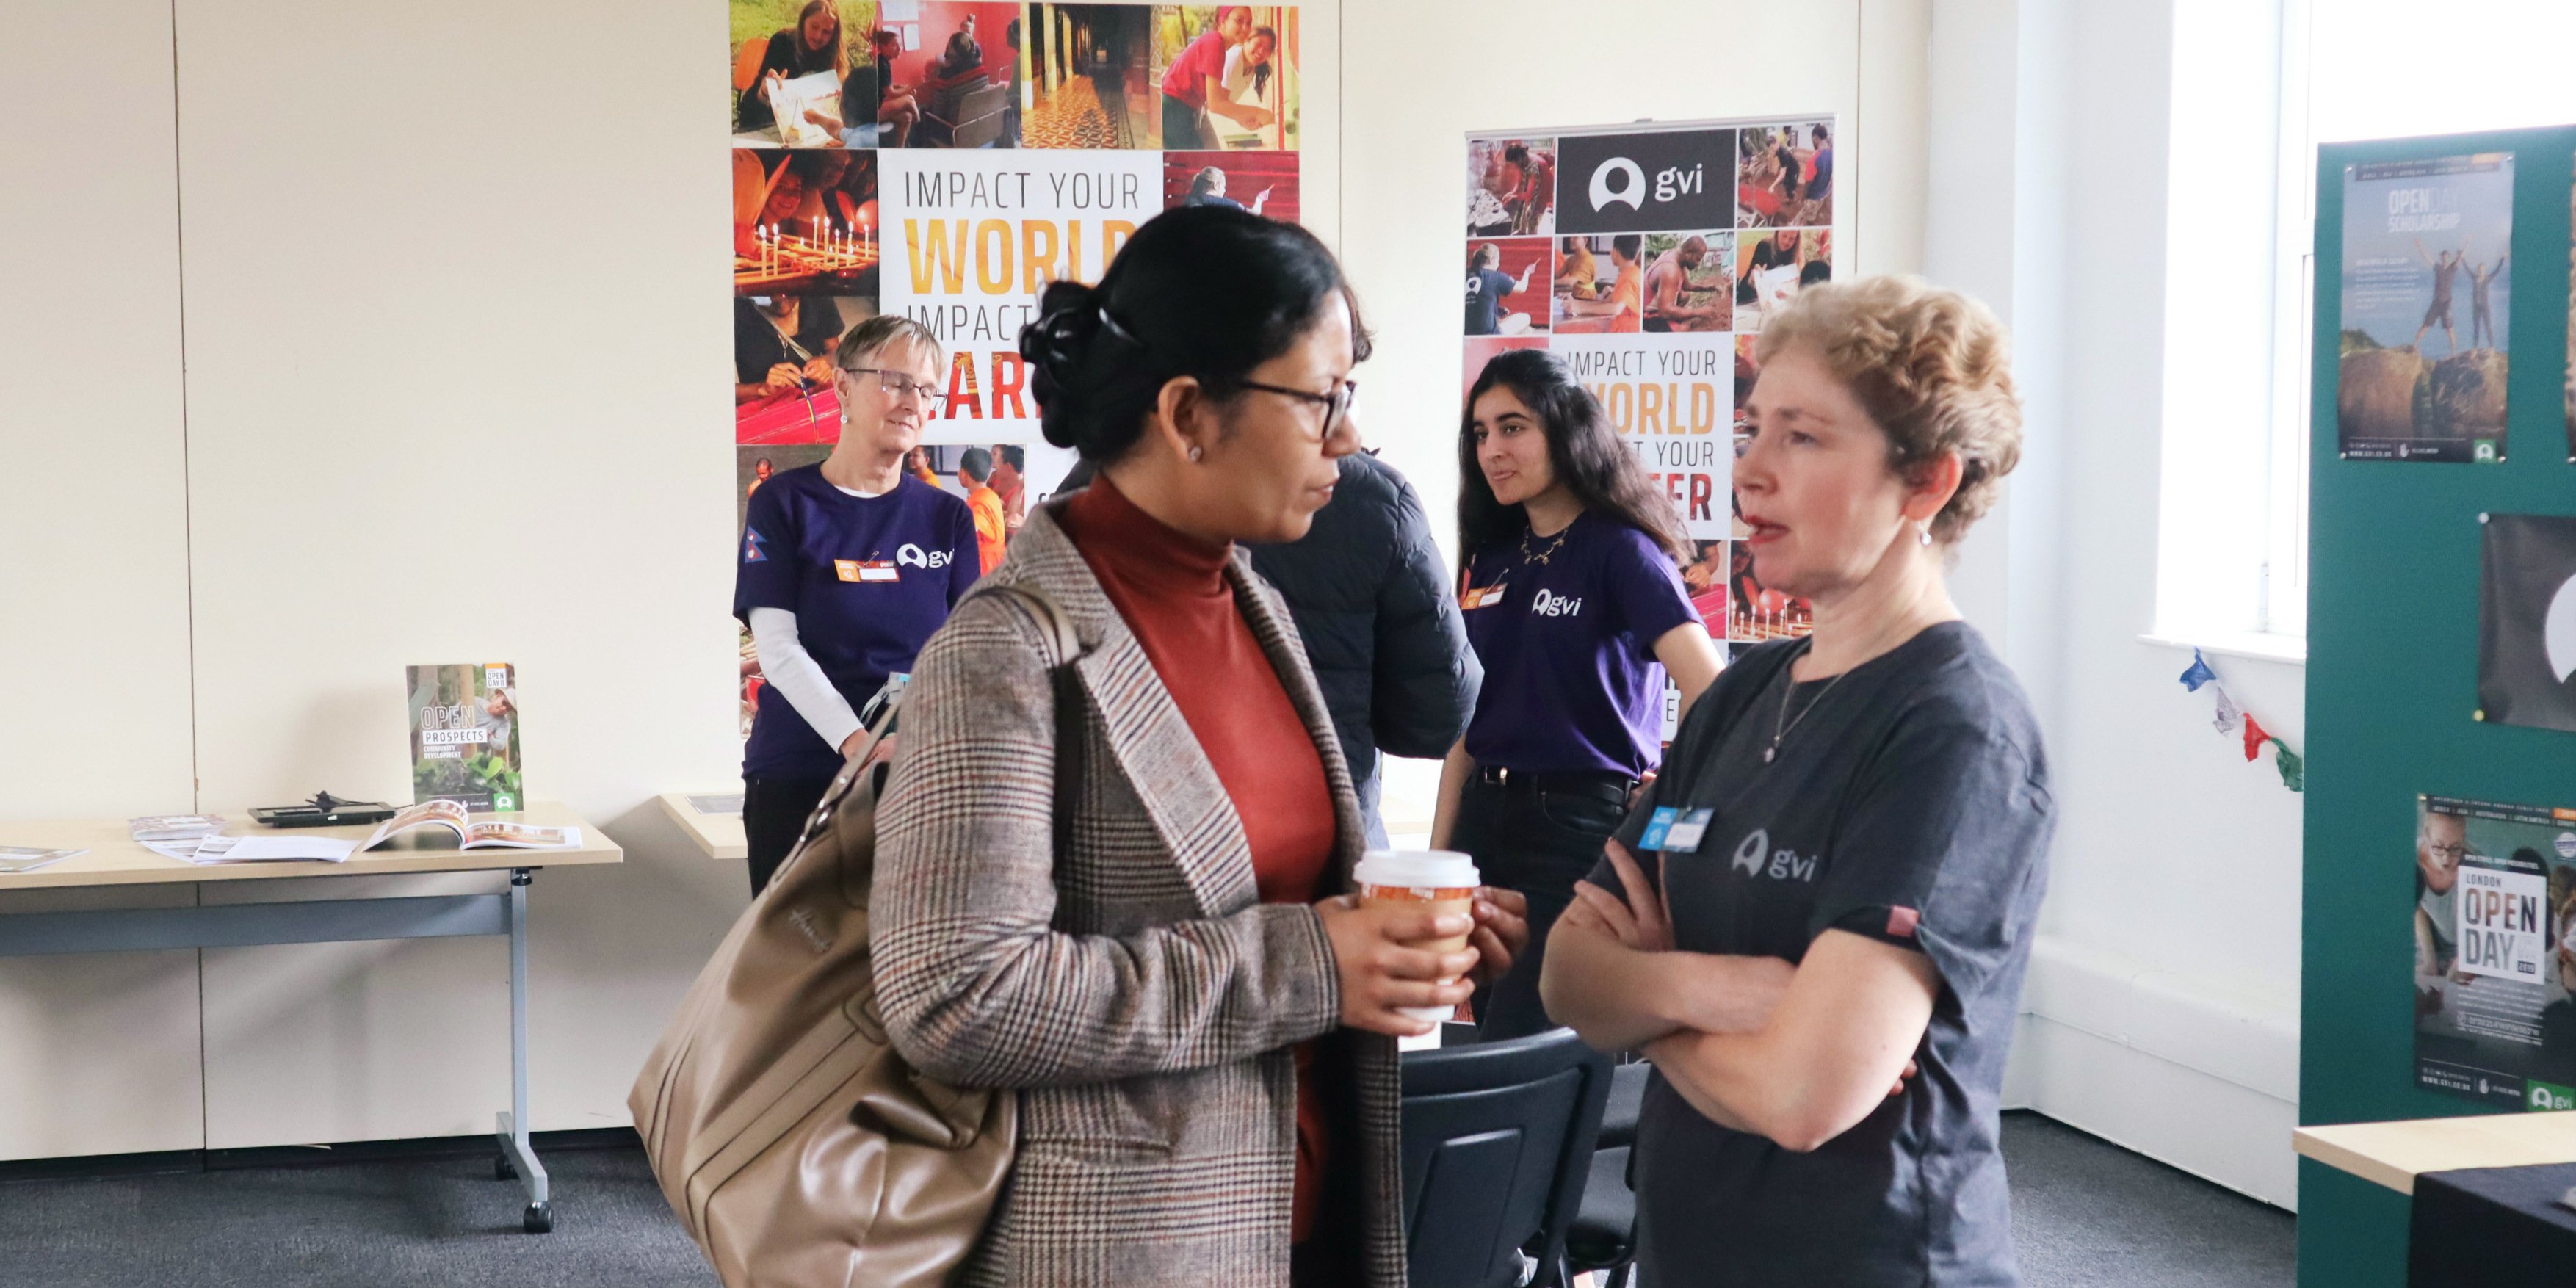 GVI ambassadors discuss GVI projects at an Open Day event in London. GVI's teen volunteering opportunities are a great way for teens to begin making an impact.